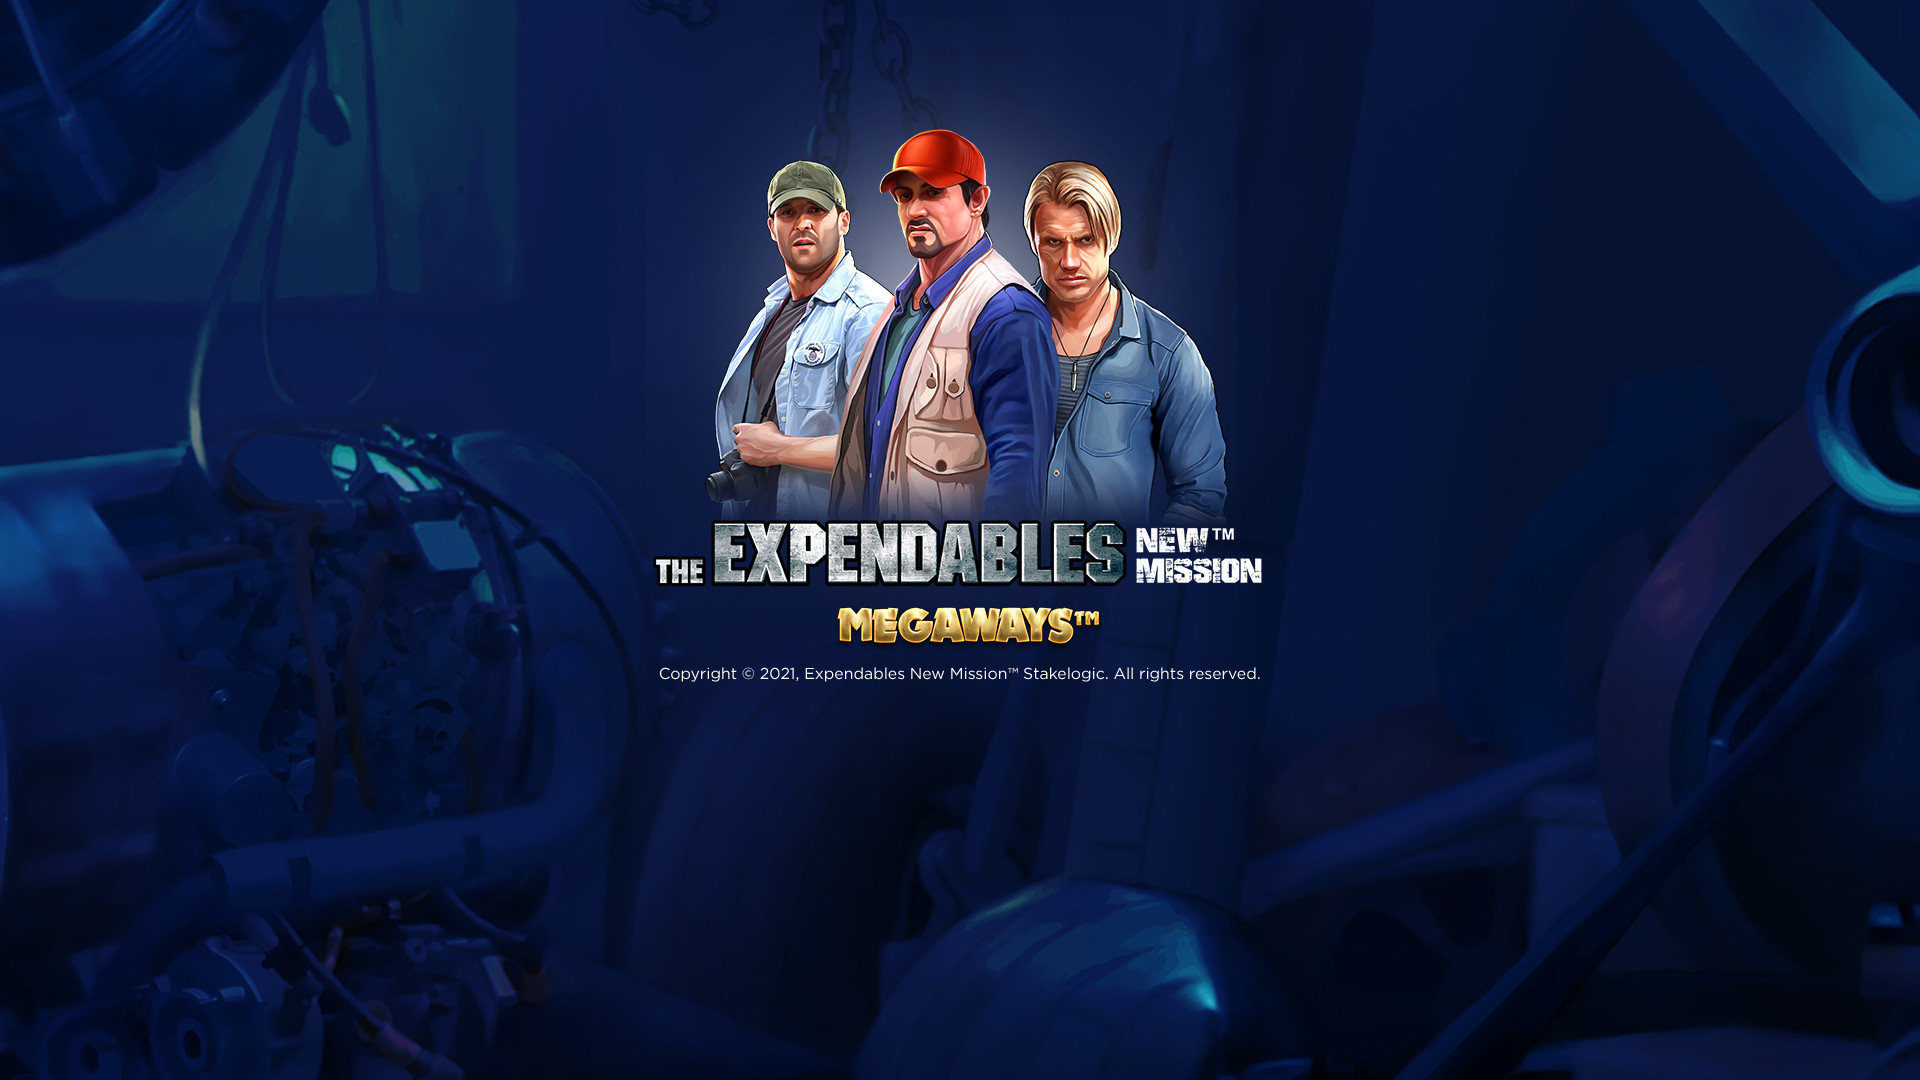 The Expendables: New Mission MEGAWAYS